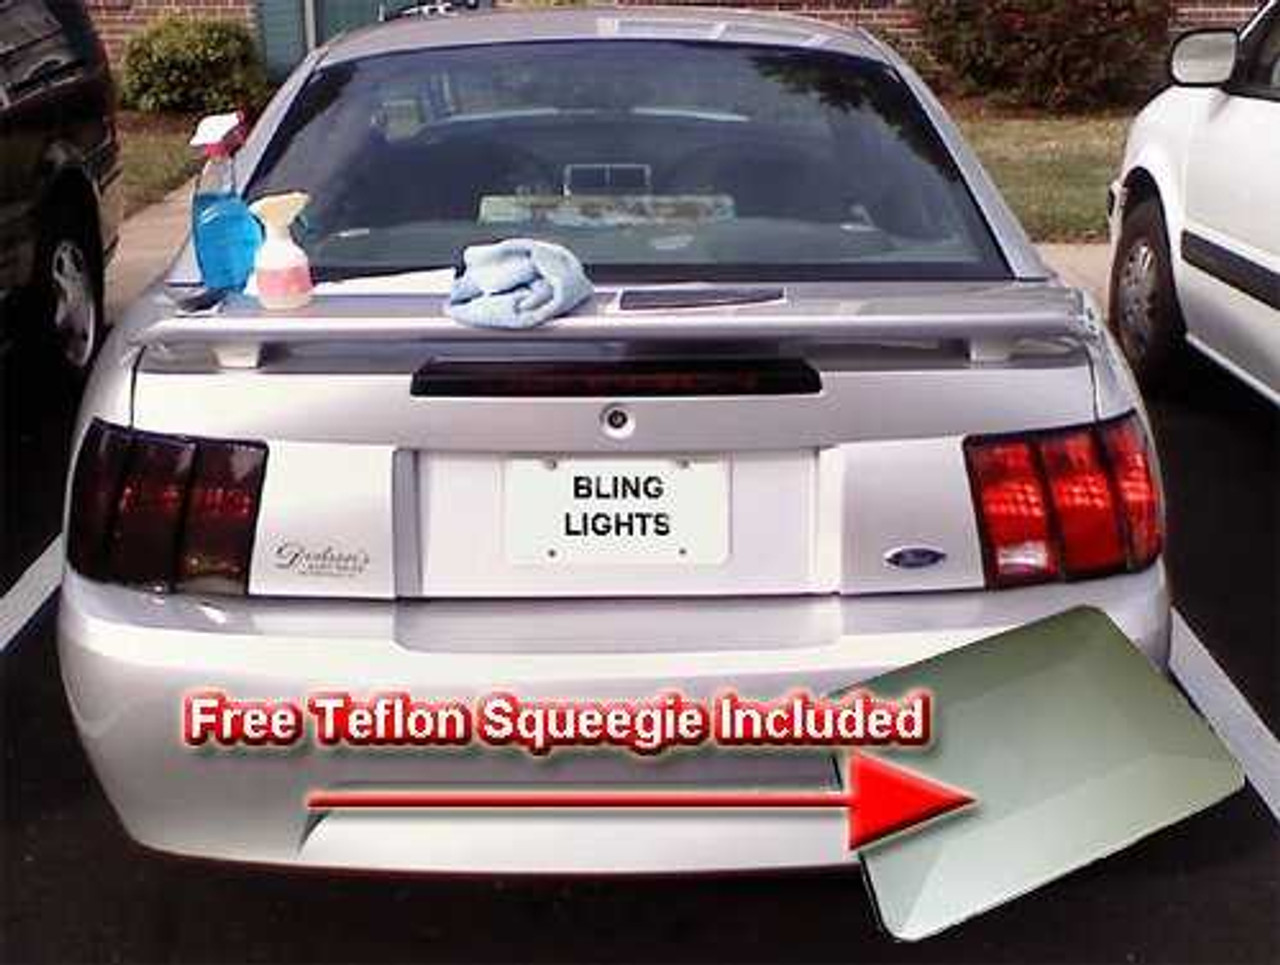 BlingLights Brand Tinted Film Covers for 1993-2002 Chevrolet Camaro Taillamps